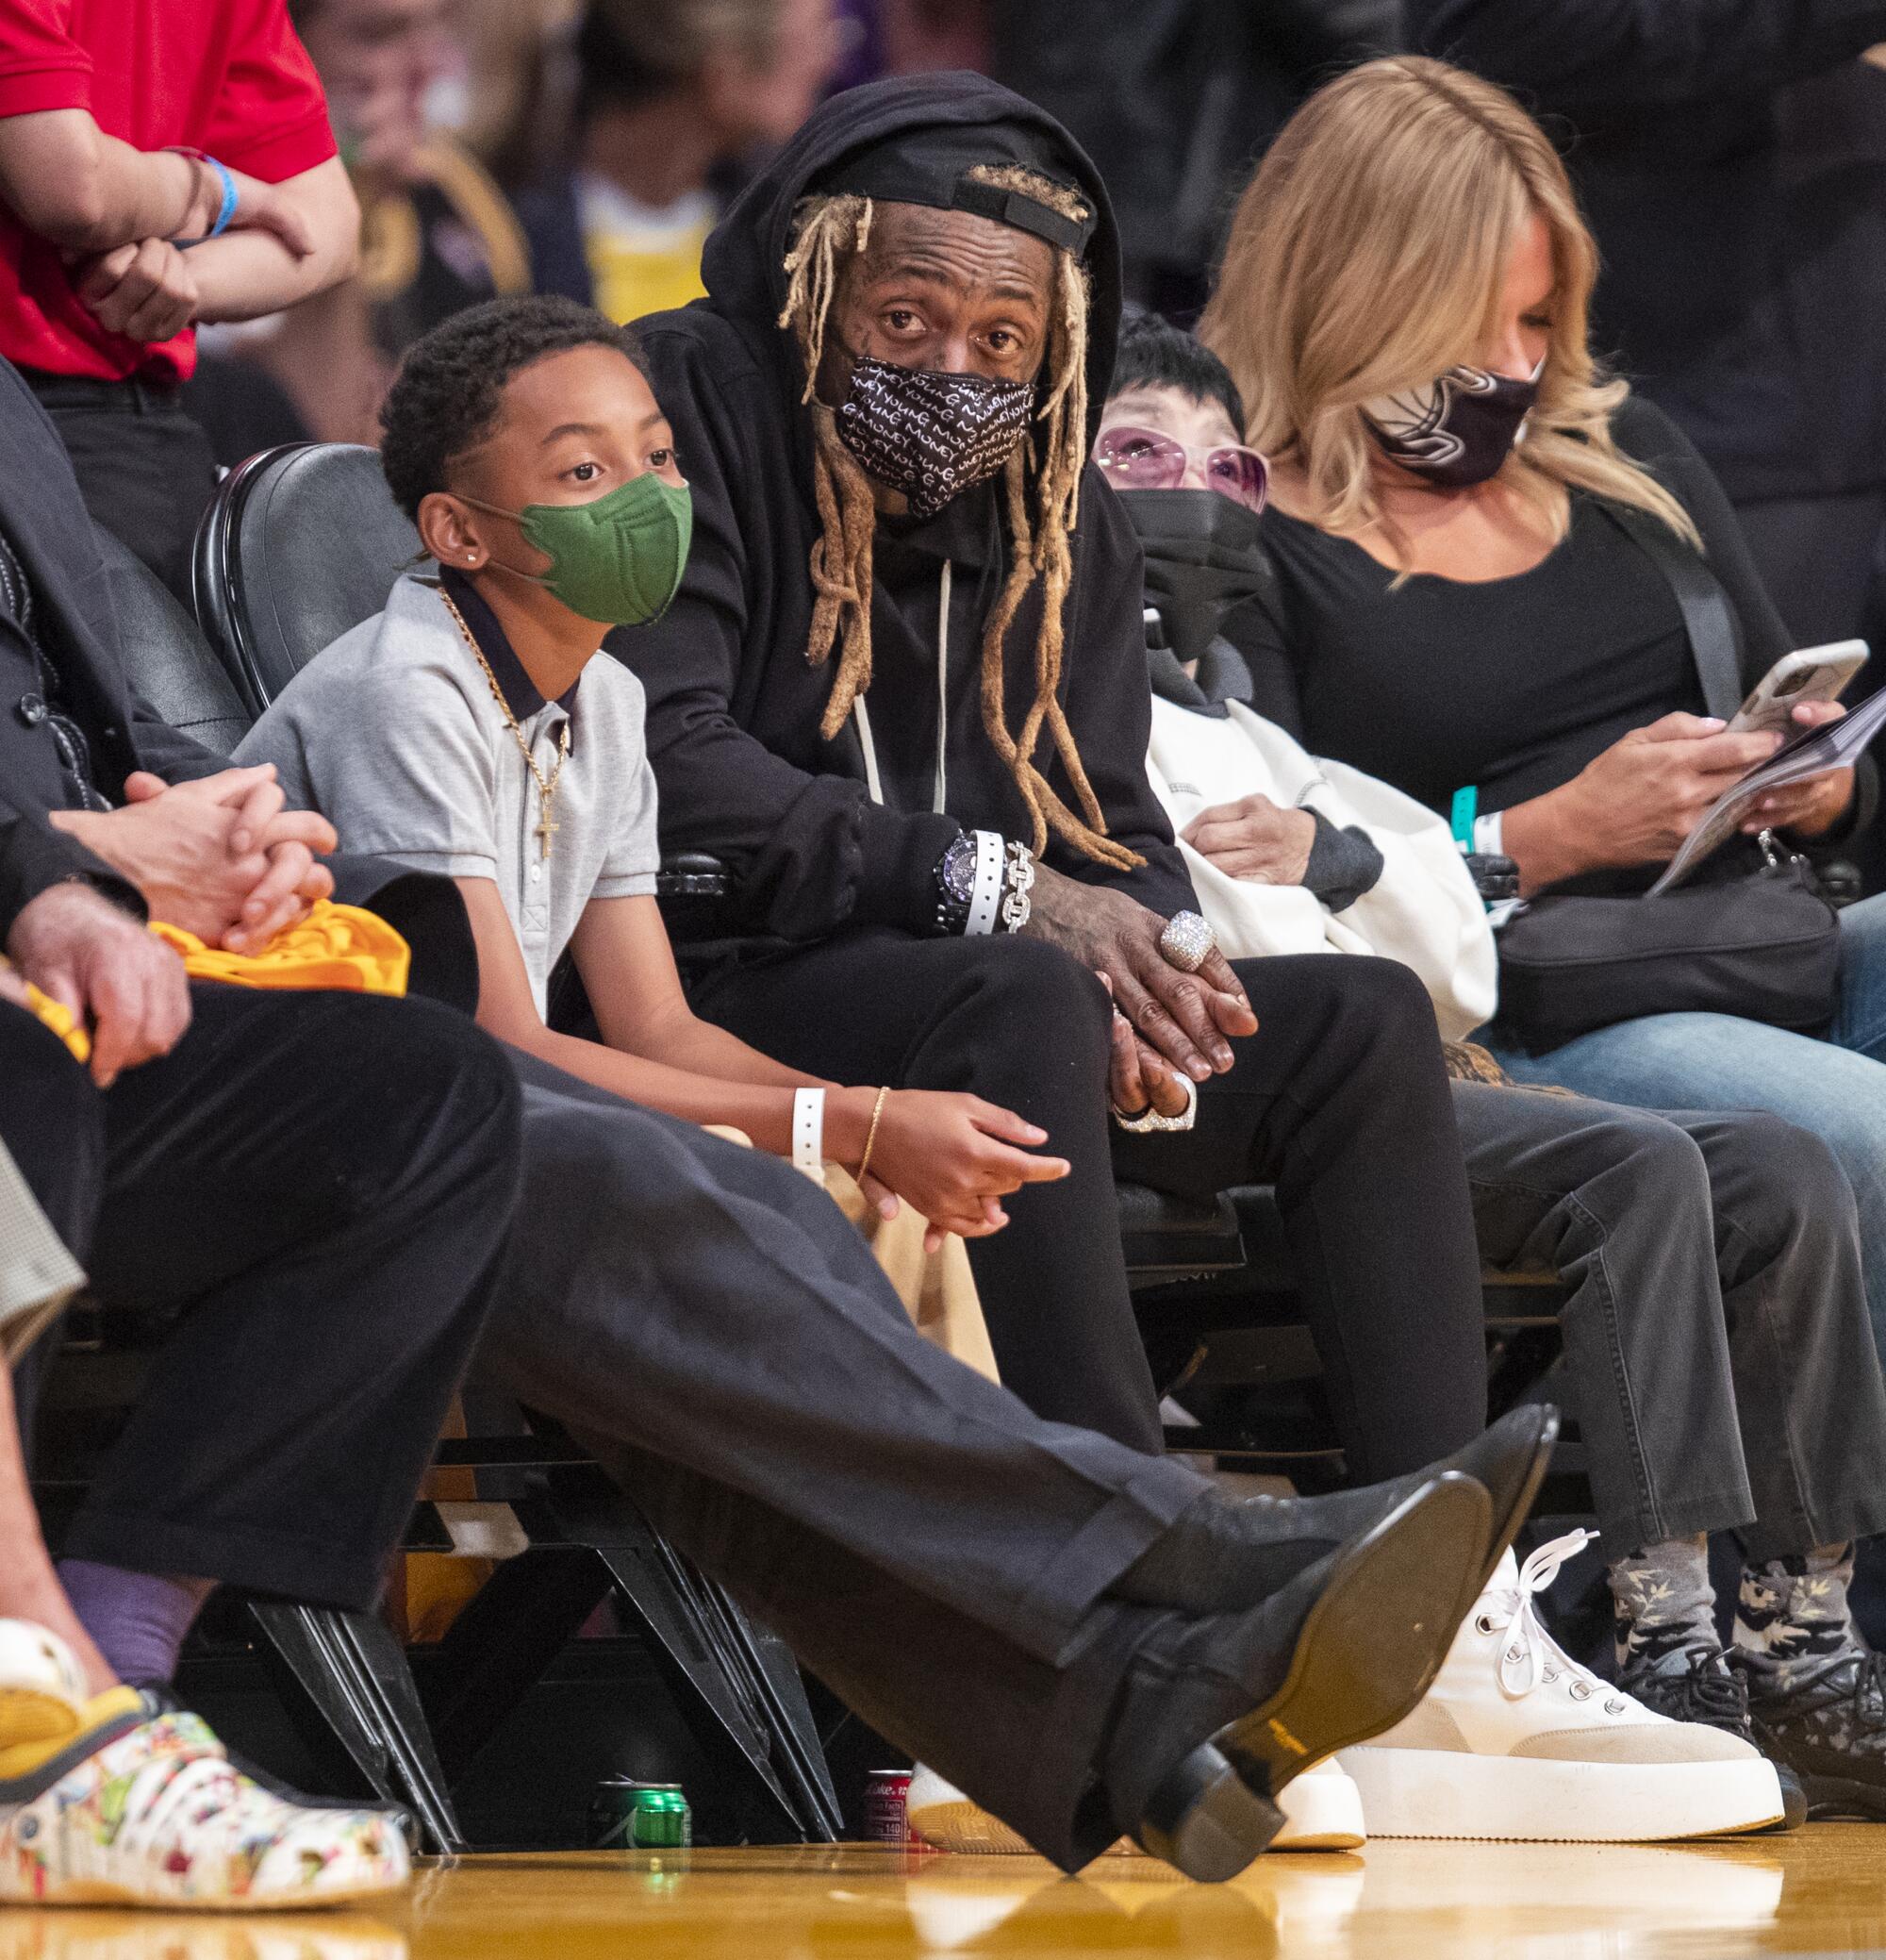 Lil Wayne and his son Kameron Carter watch the Lakers game.